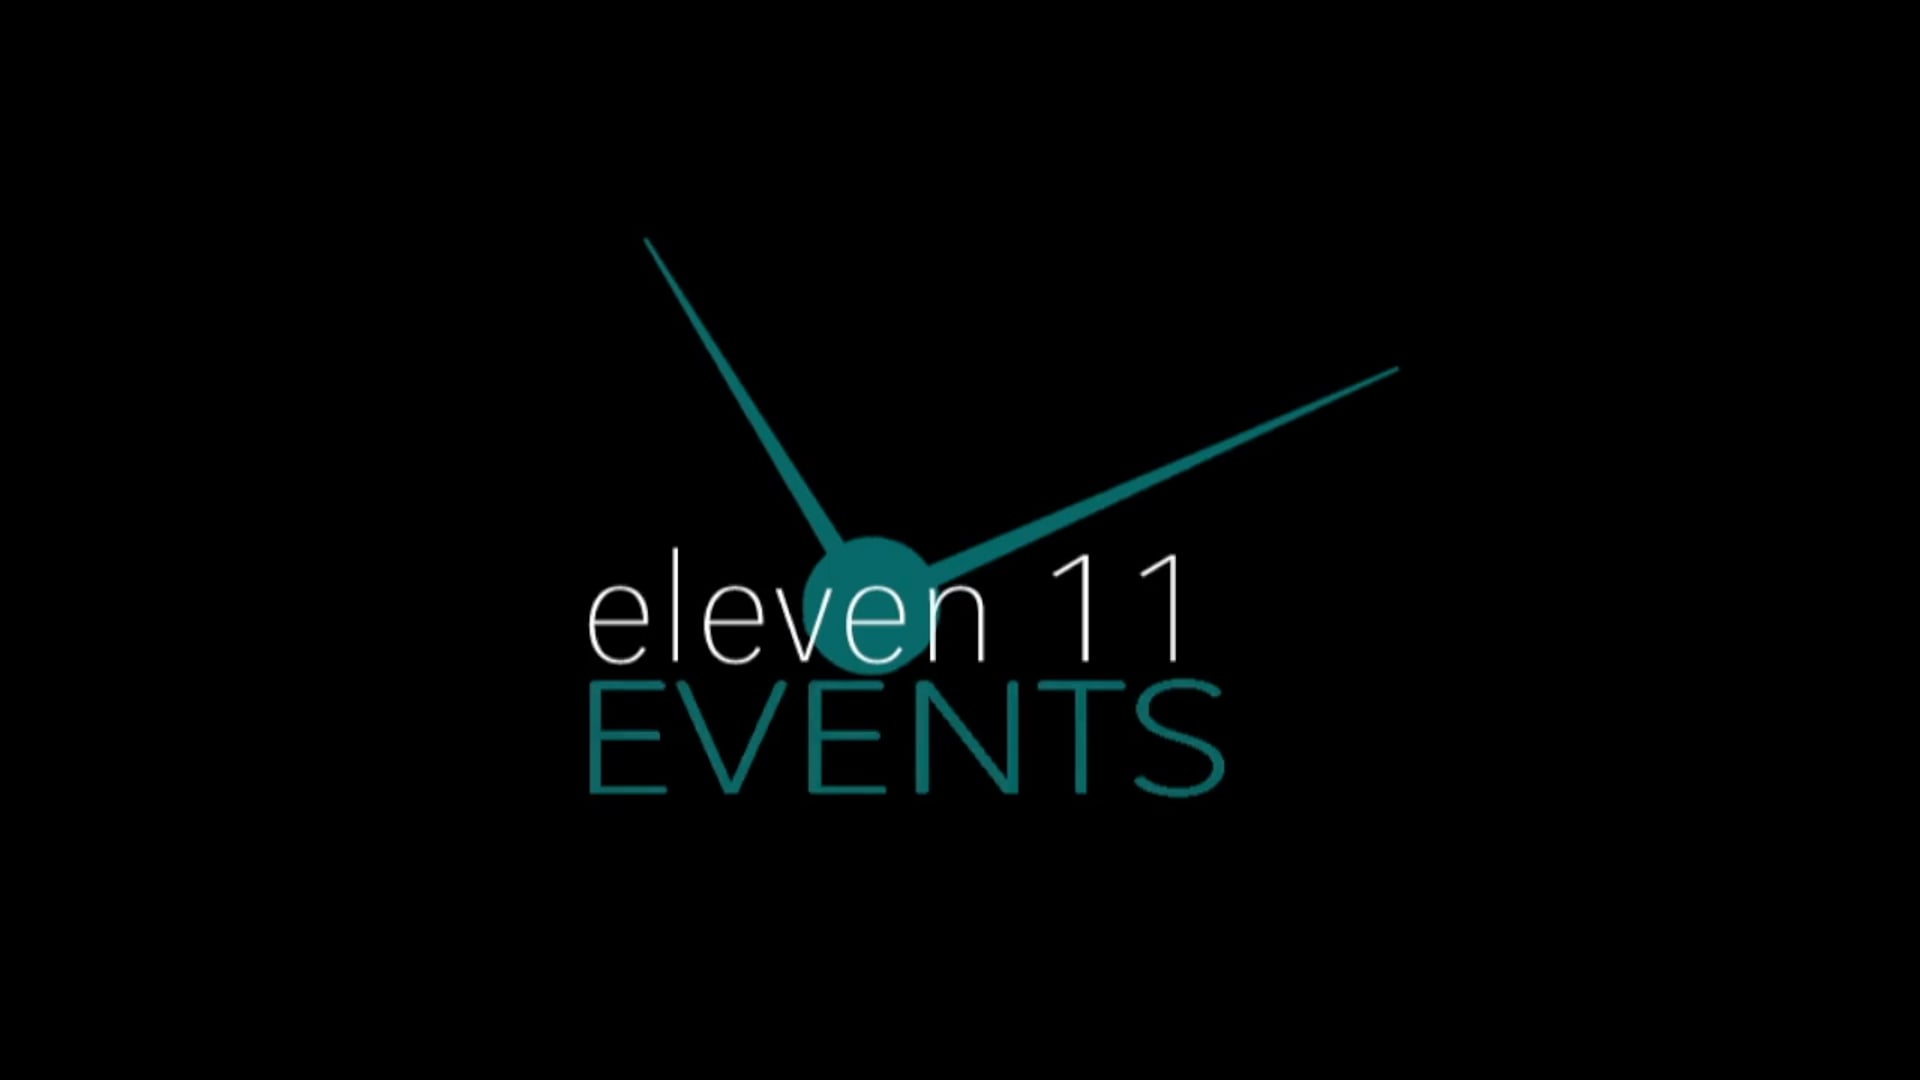 Introducing Eleven 11 Events!